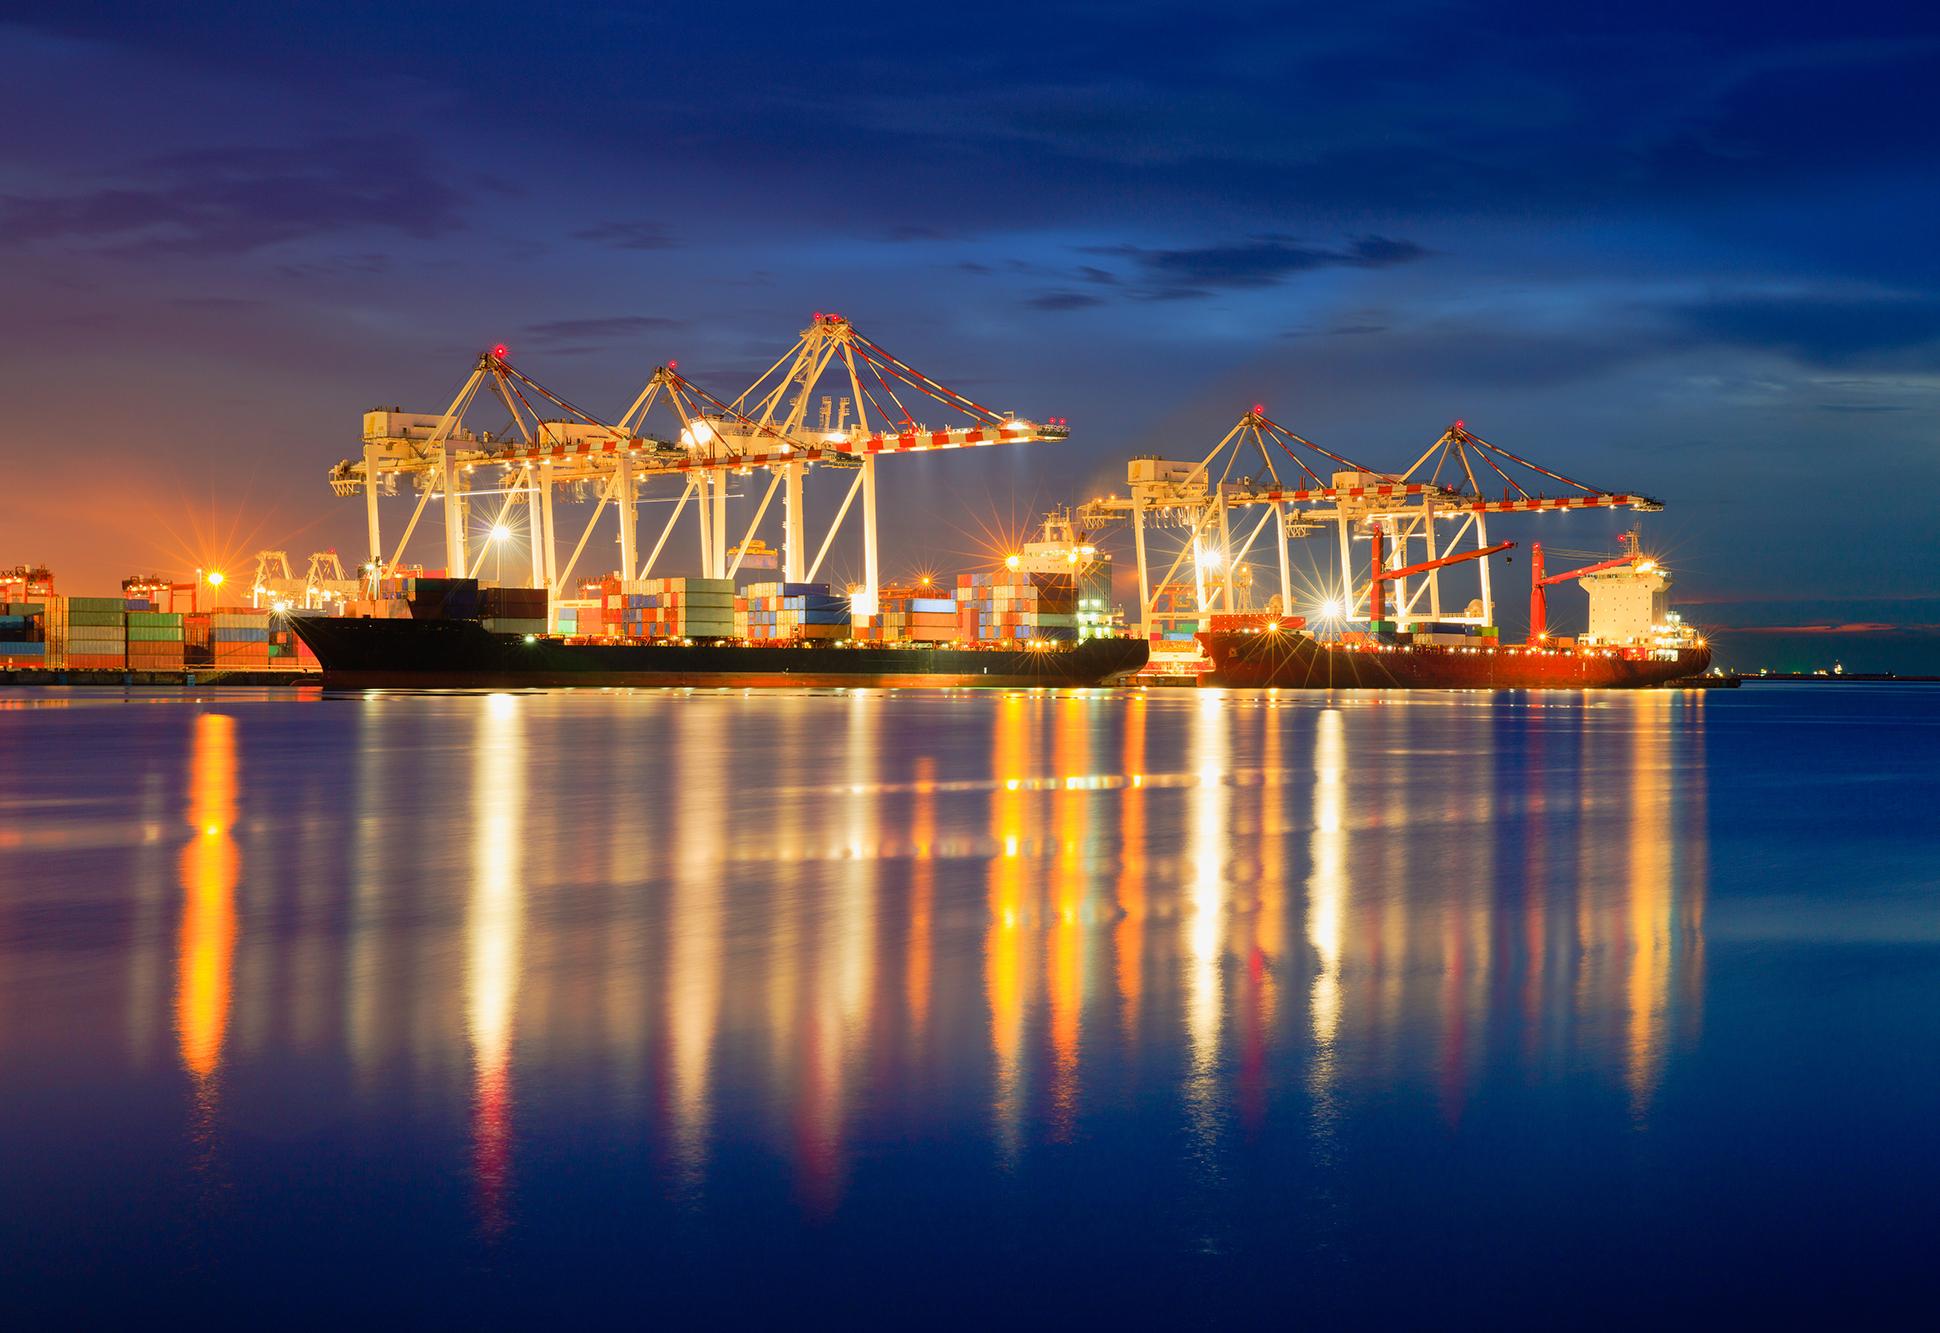 Planned freeports will make the UK an easy target for criminals - The ...